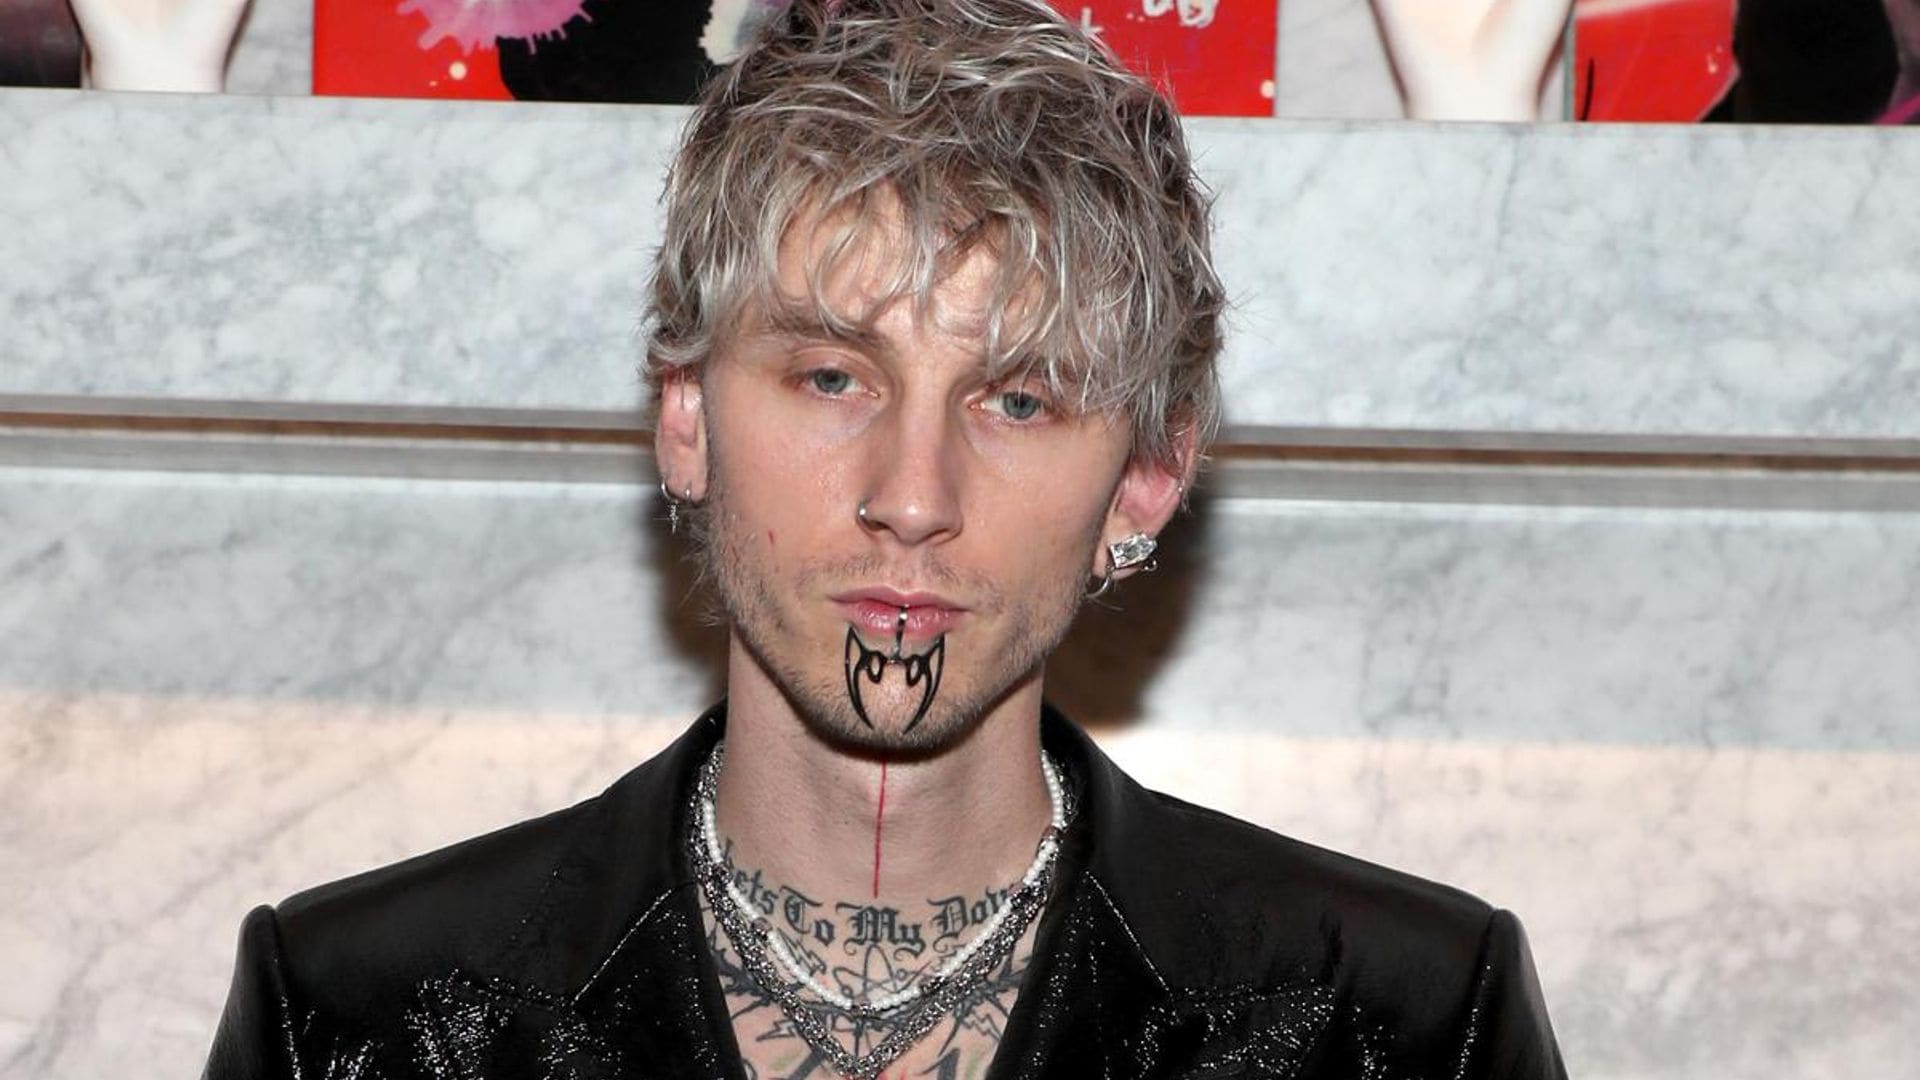 Machine Gun Kelly covers his upper body with massive blackout tattoo